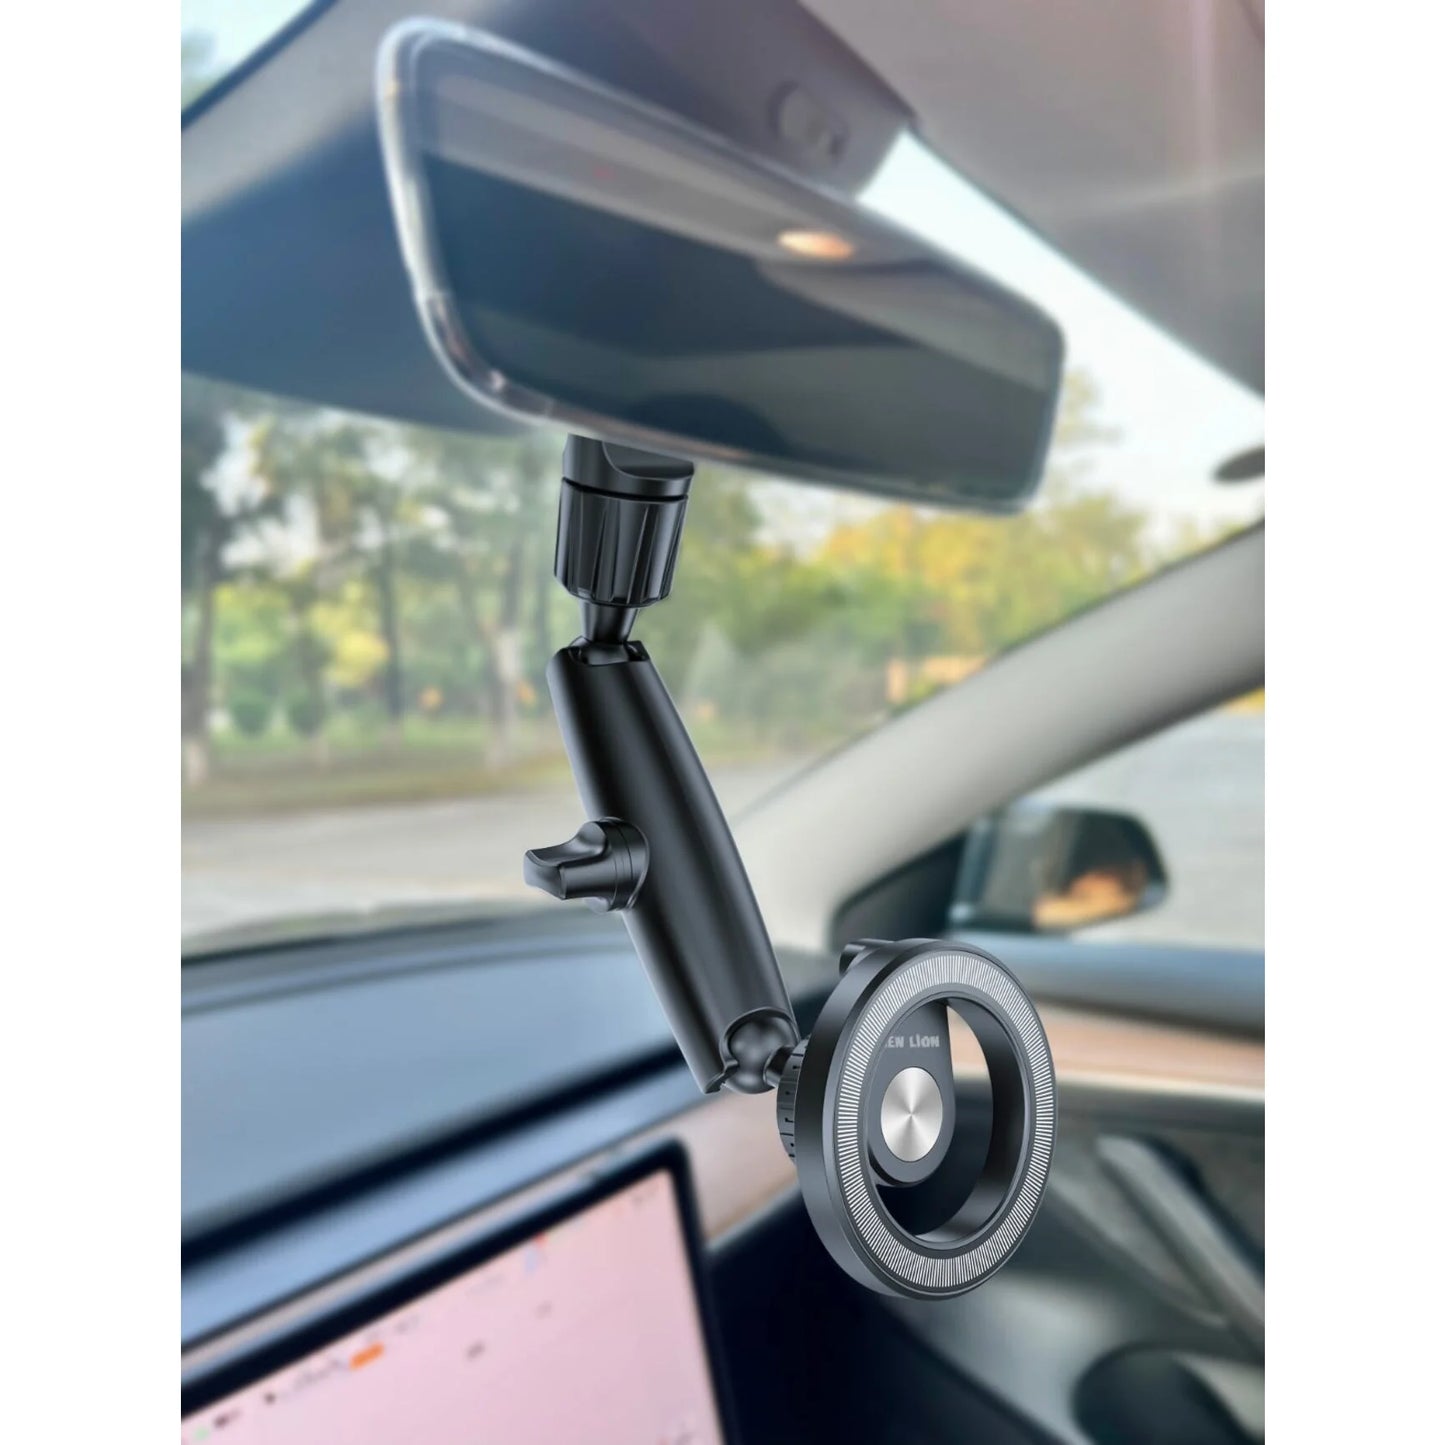 Green 360 MagSafe Rear View Mirror Phone Holder